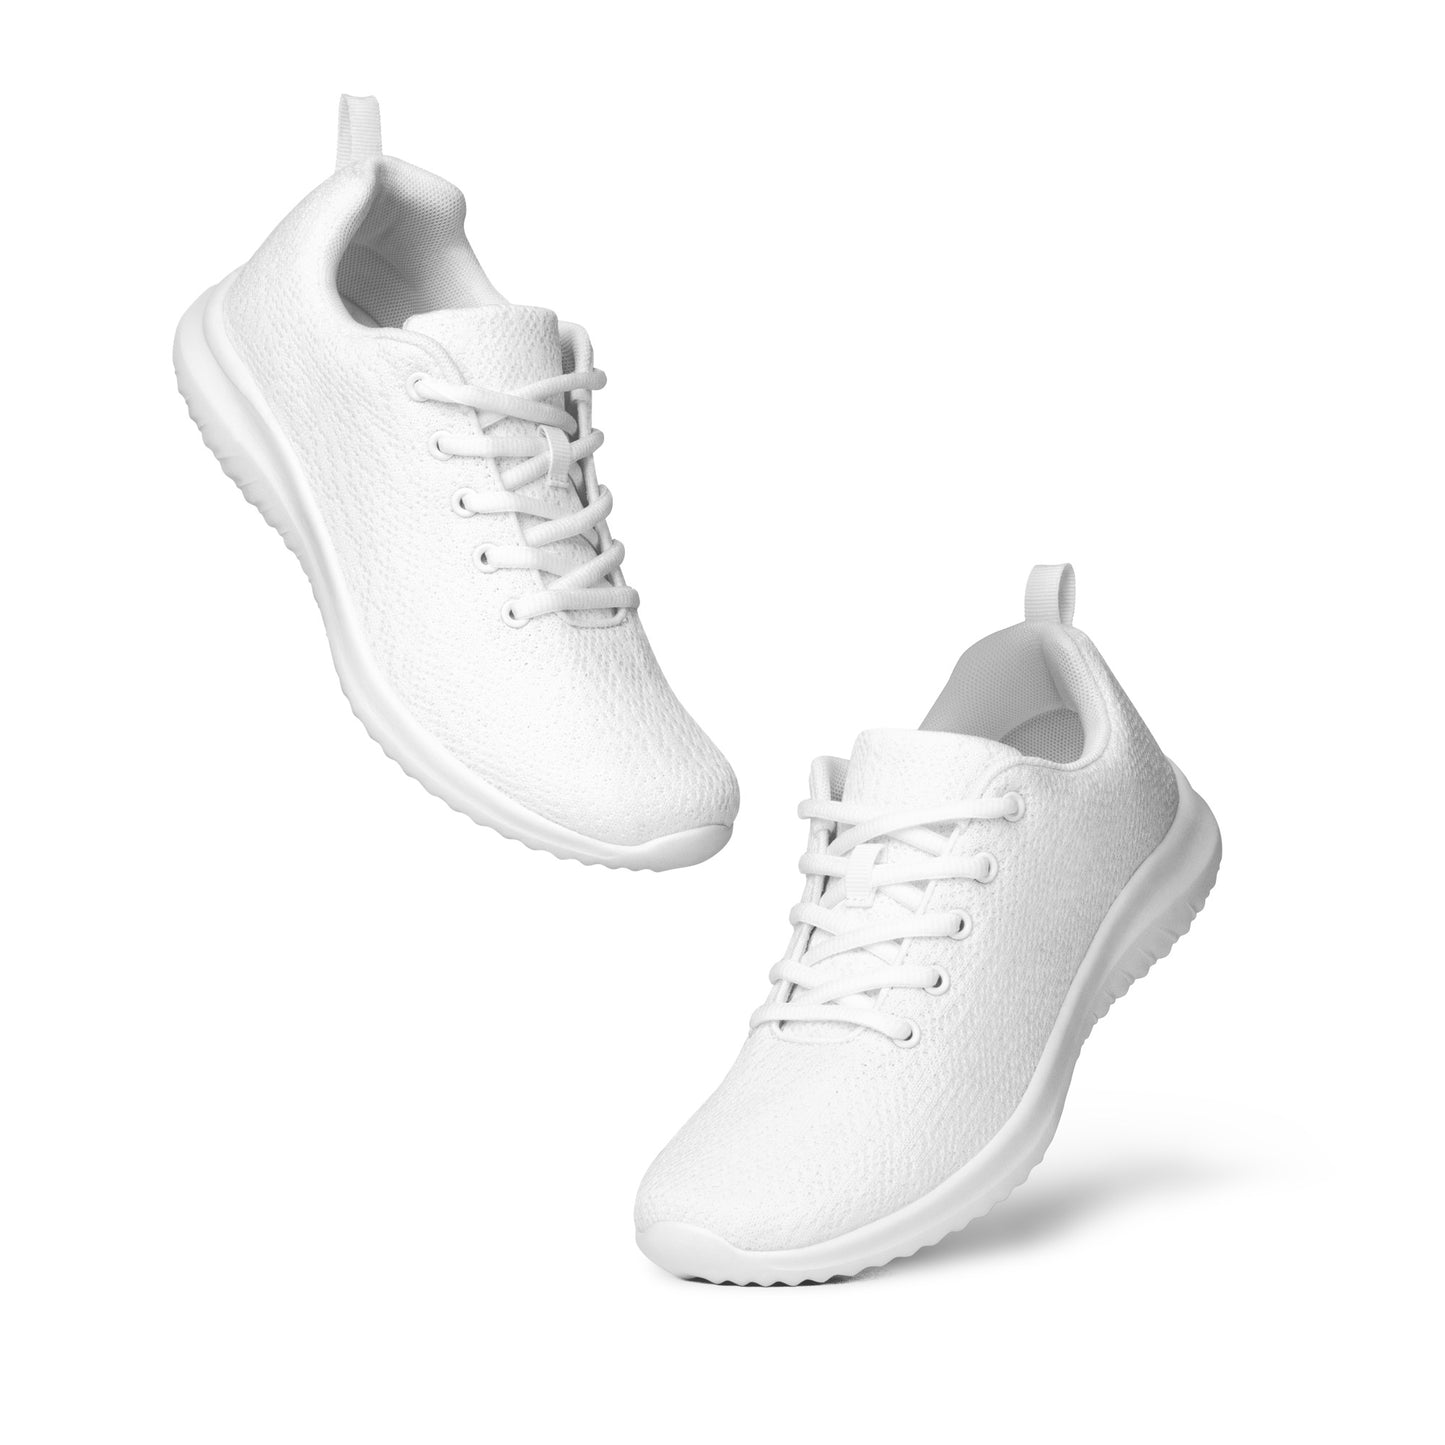 DASH White Women’s Athletic Shoes Lightweight Breathable Design by IOBI Original Apparel